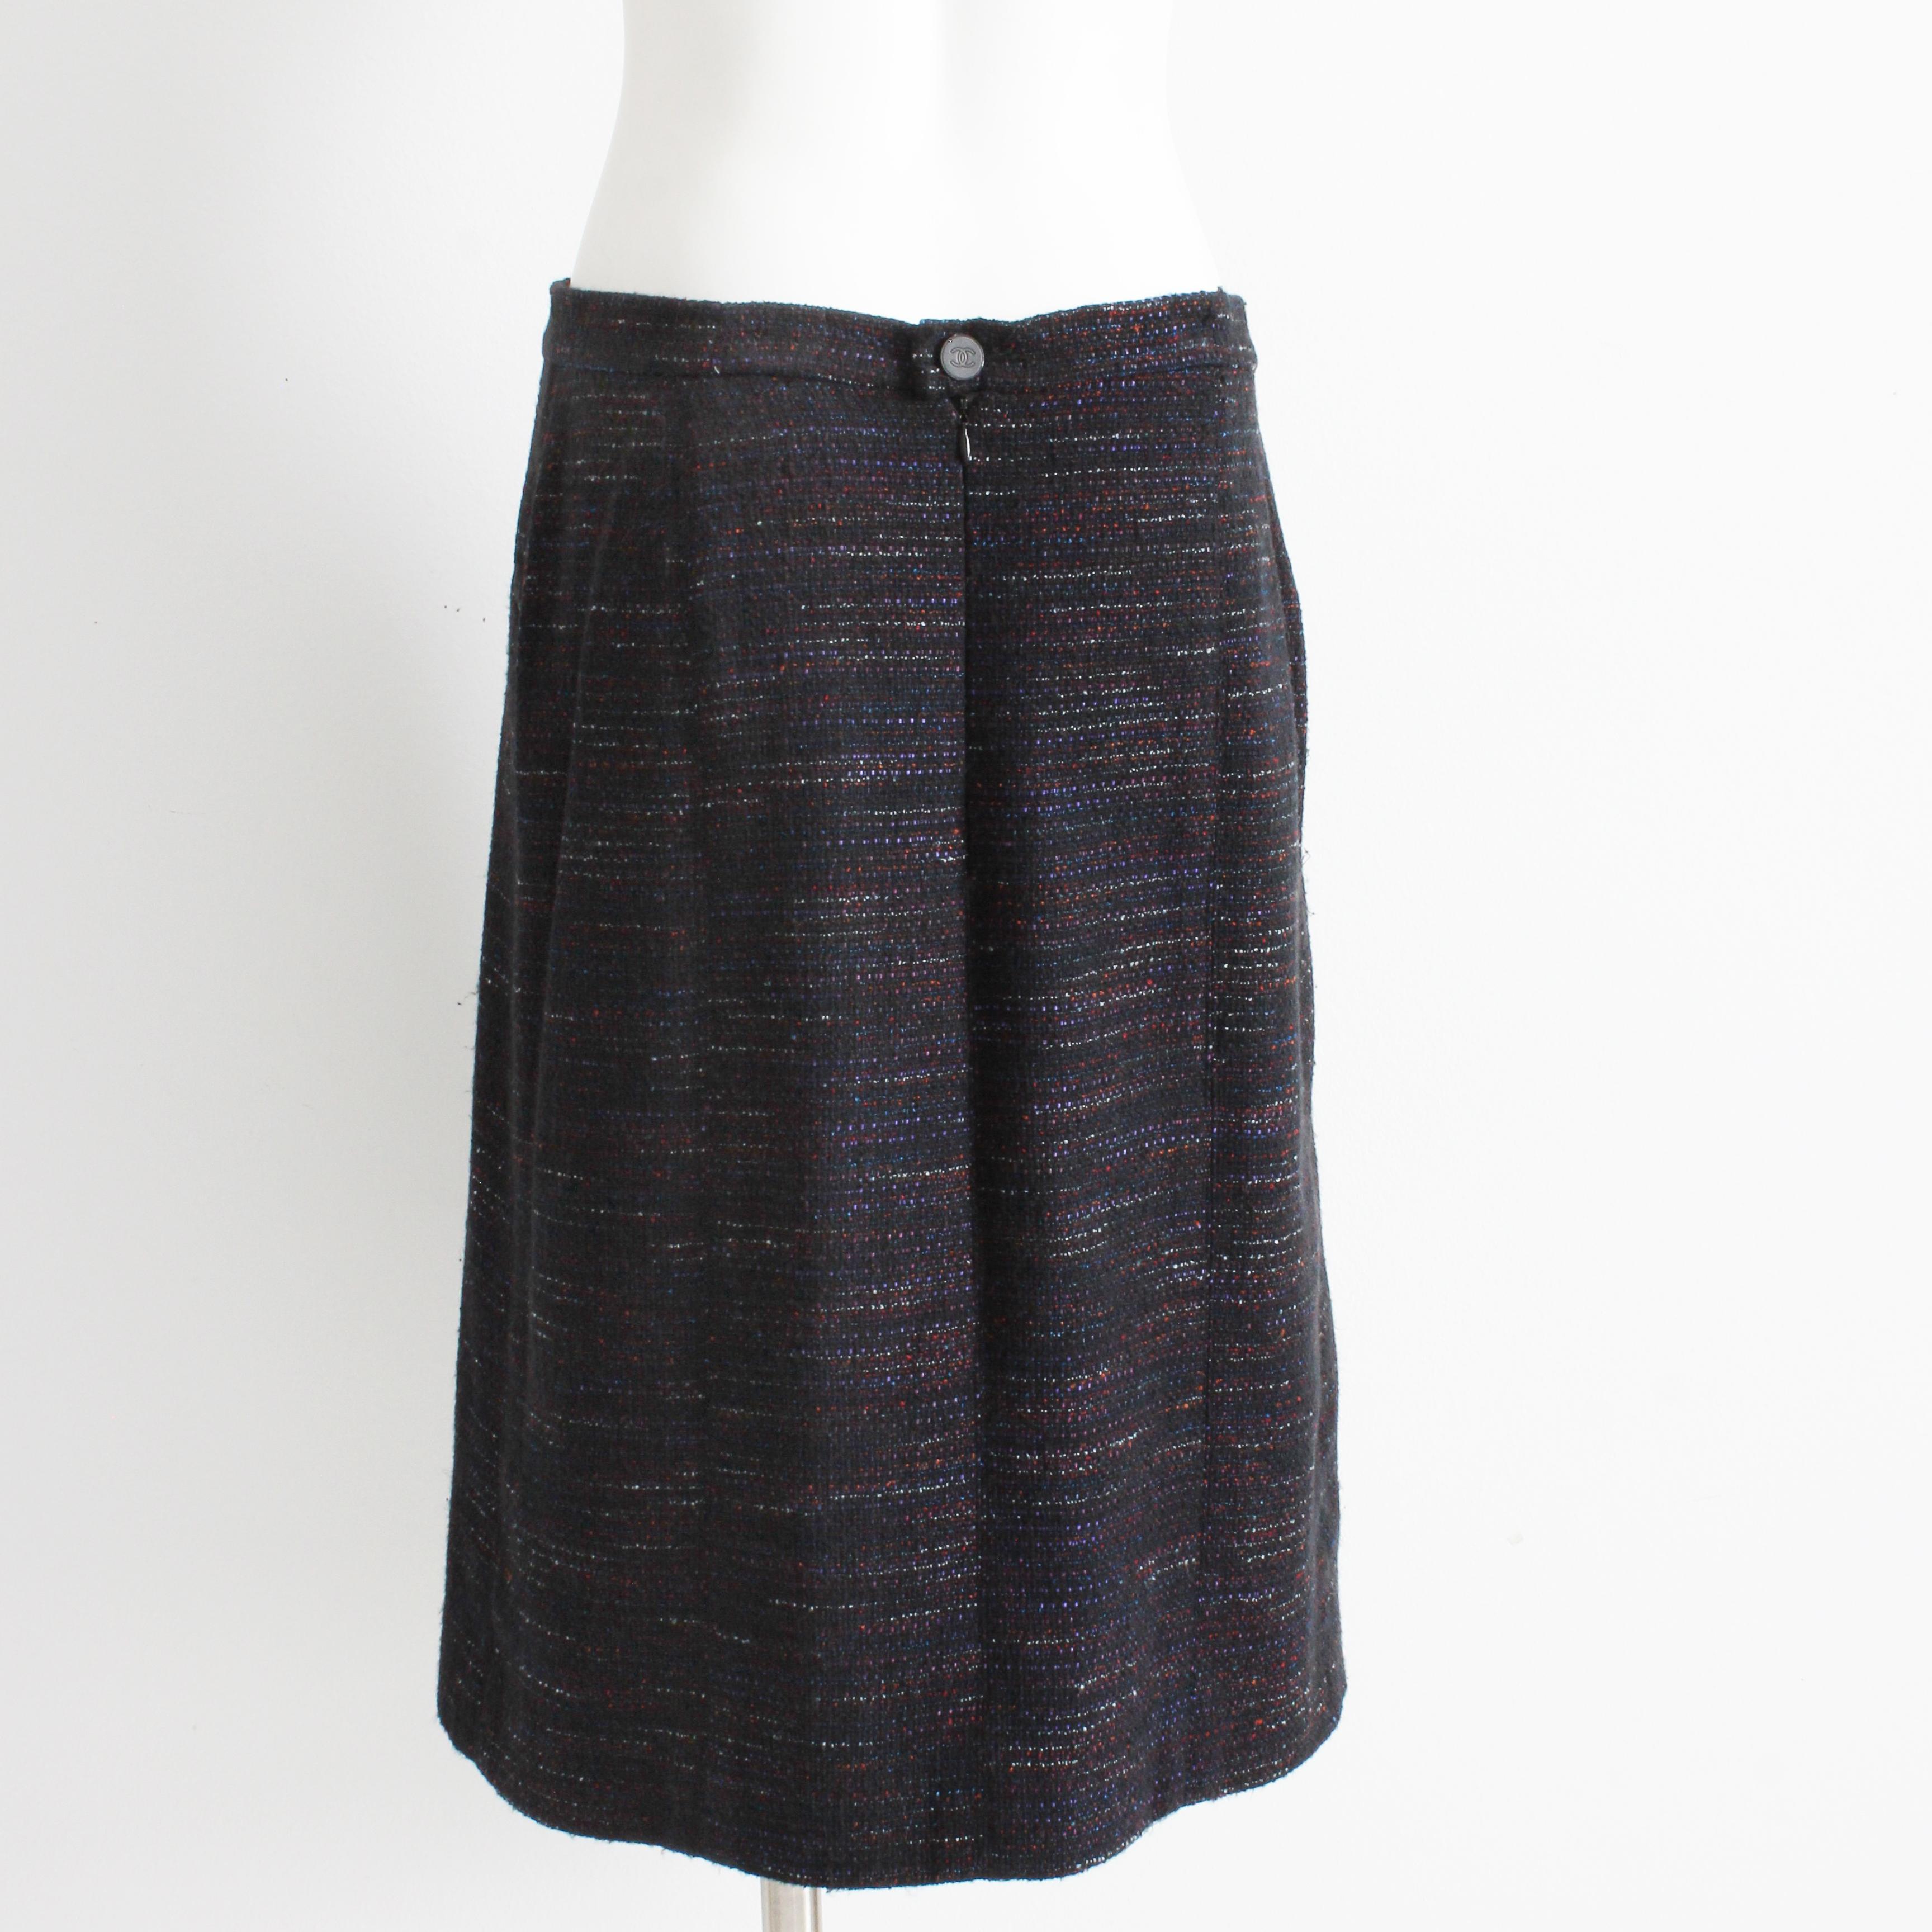 Chanel Skirt Multicolor Cotton Blend Tweed Pencil Style 02A Collection Size 40 For Sale 3